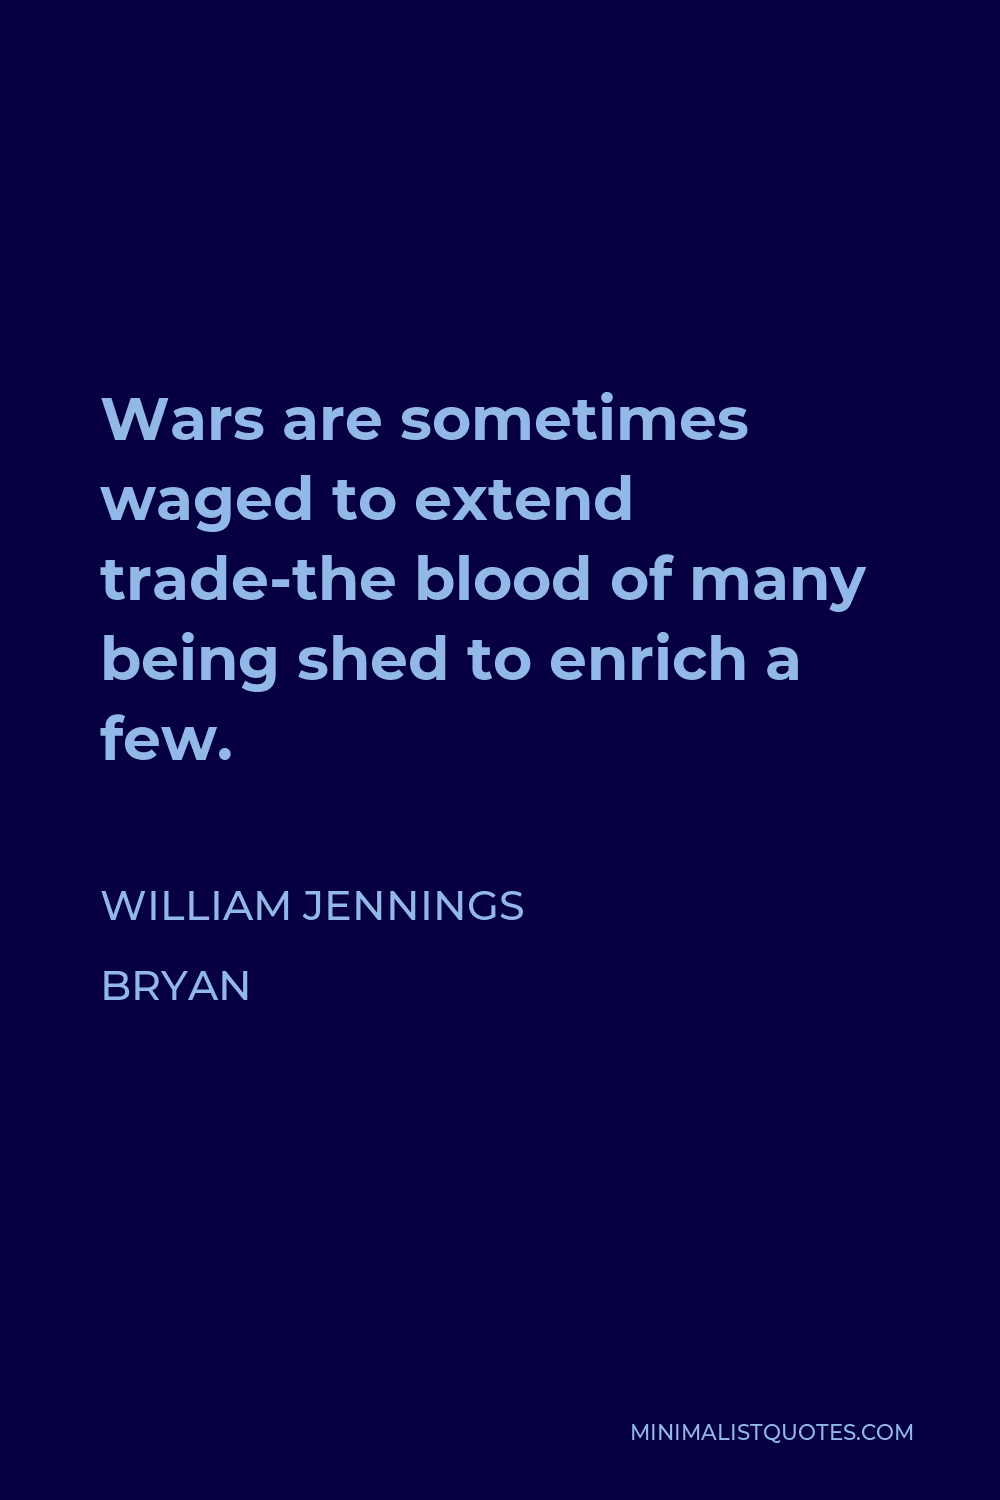 William Jennings Bryan Quote - Wars are sometimes waged to extend trade-the blood of many being shed to enrich a few.